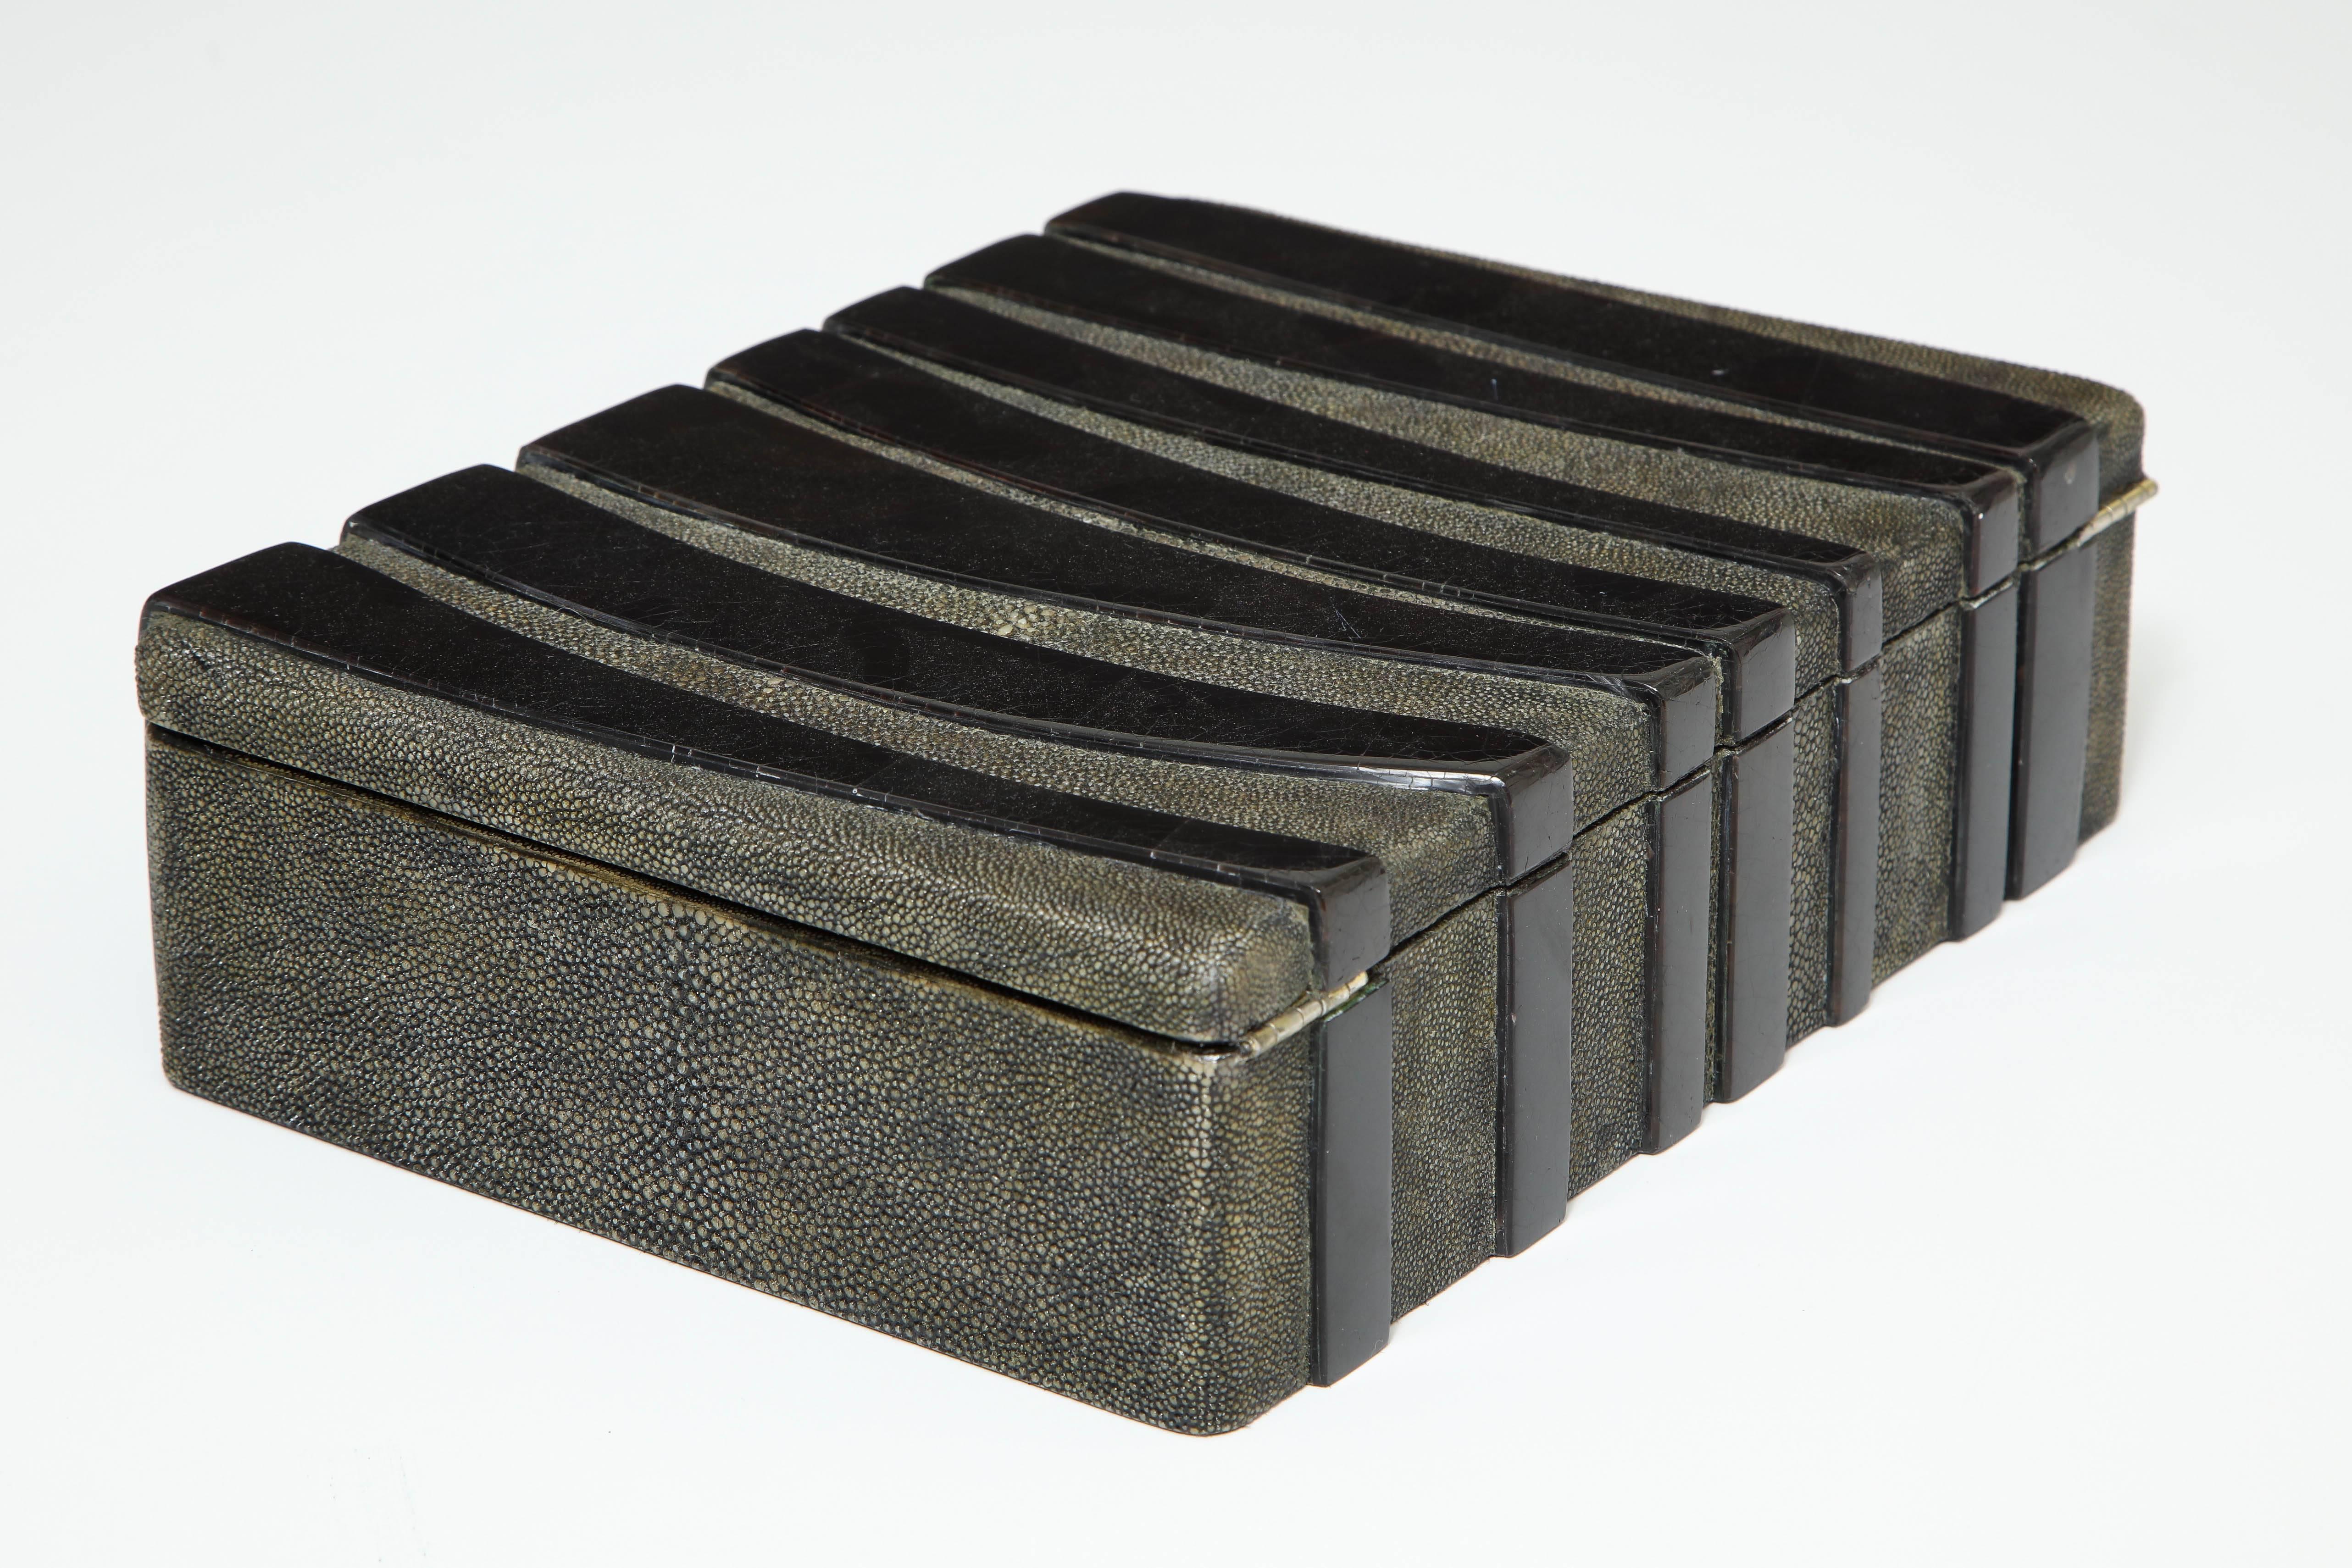 Contemporary Shagreen Decorative Box, Black Shagreen and Palm Wood Details